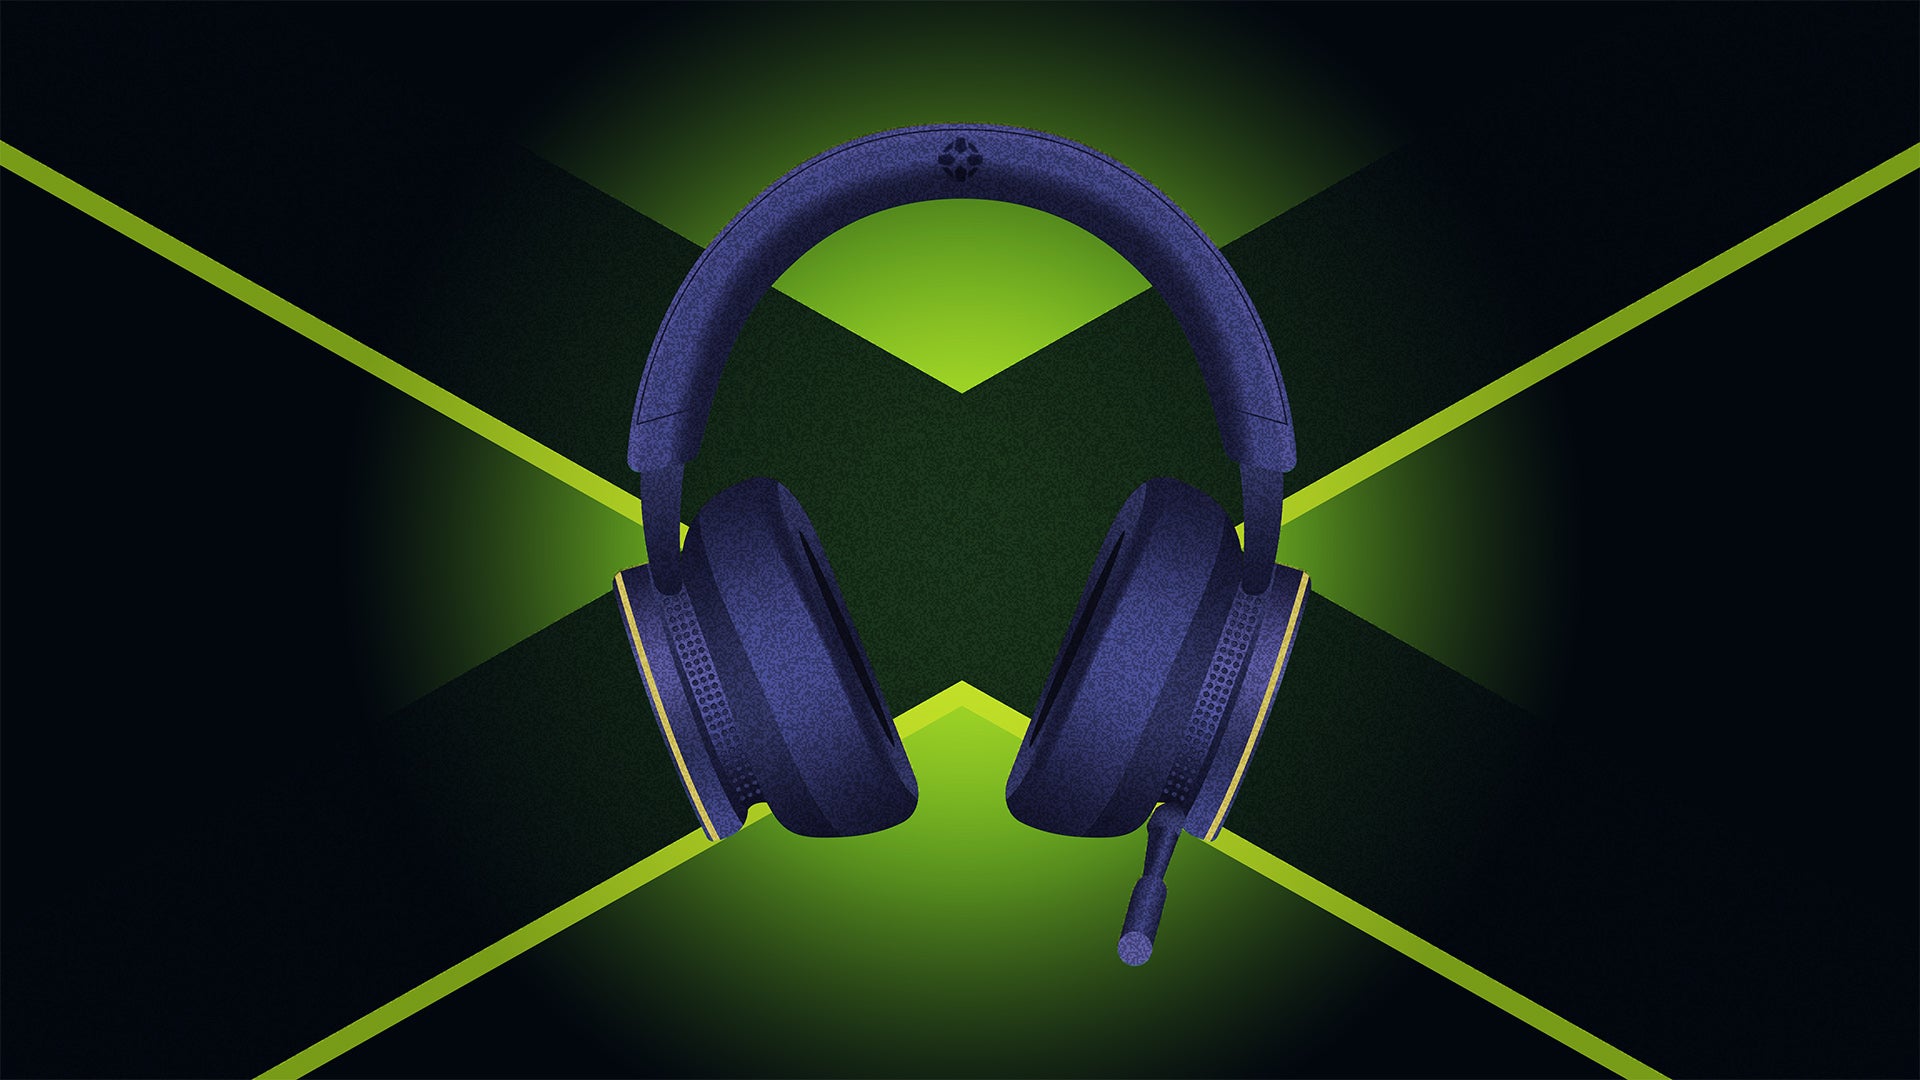 immersive-gaming-getting-game-audio-on-xbox-one-headset